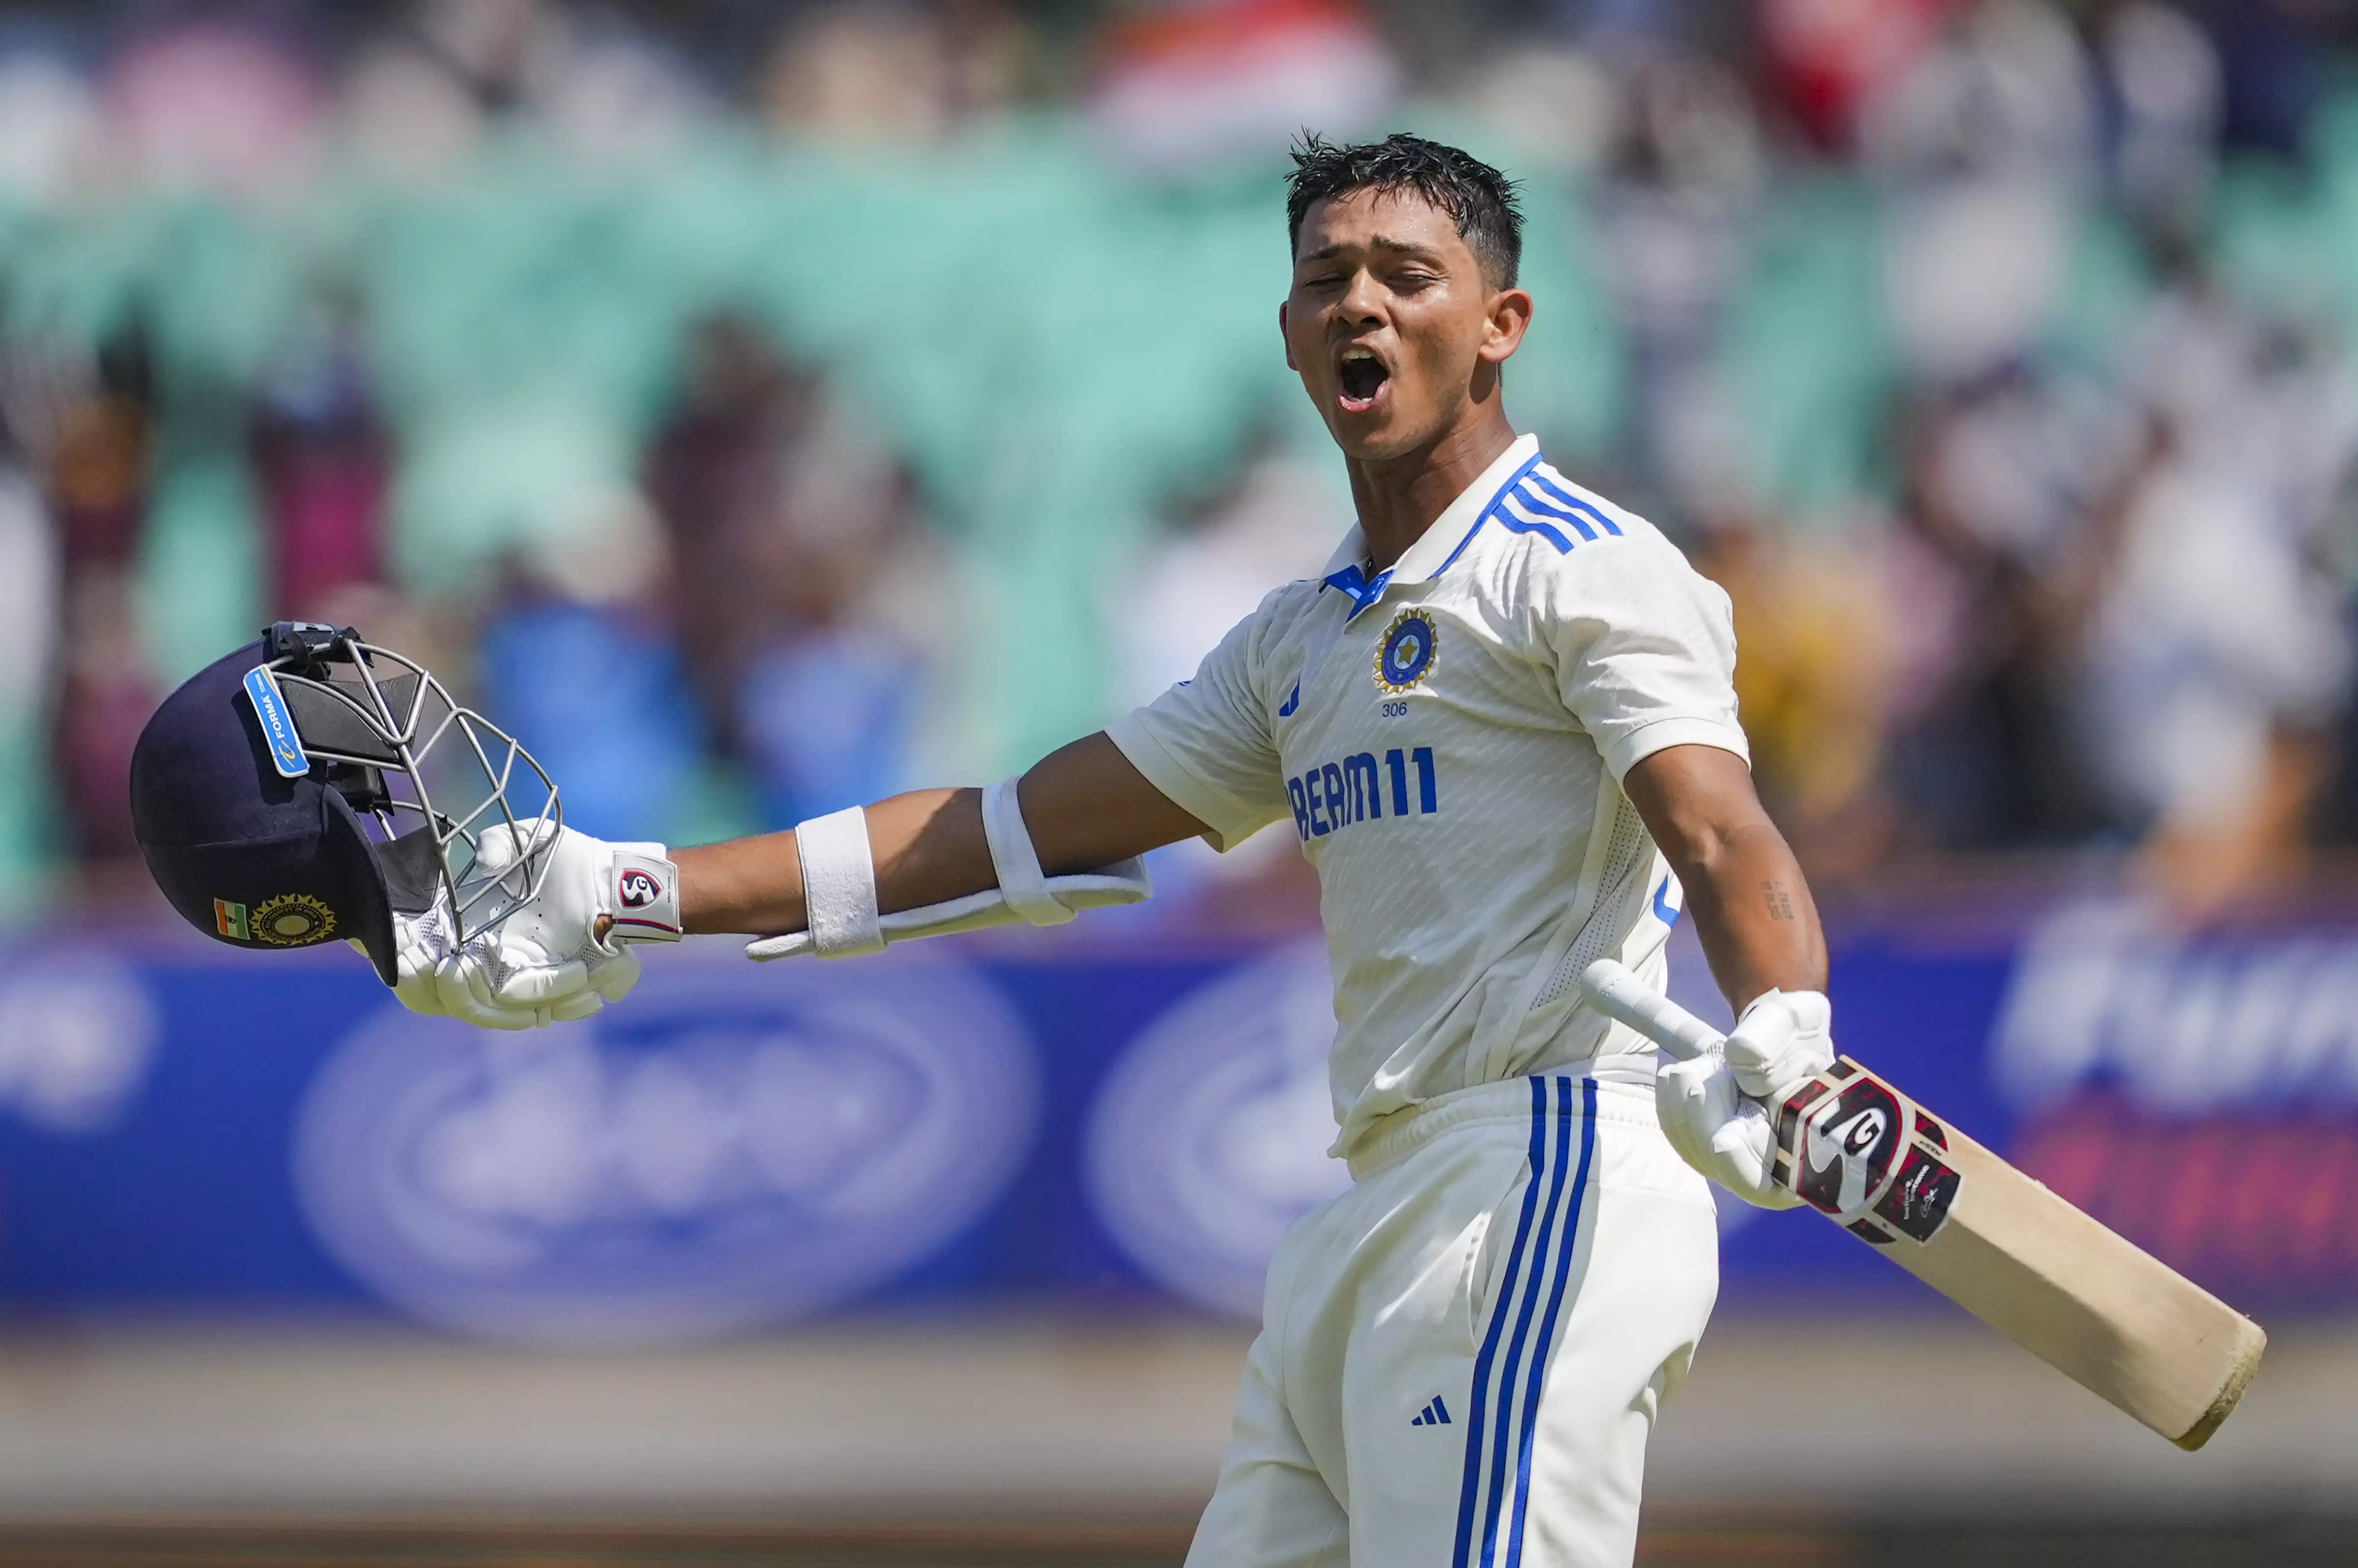 Yashasvi Jaiswal: Test cricket is tough, but I'm determined to make it count